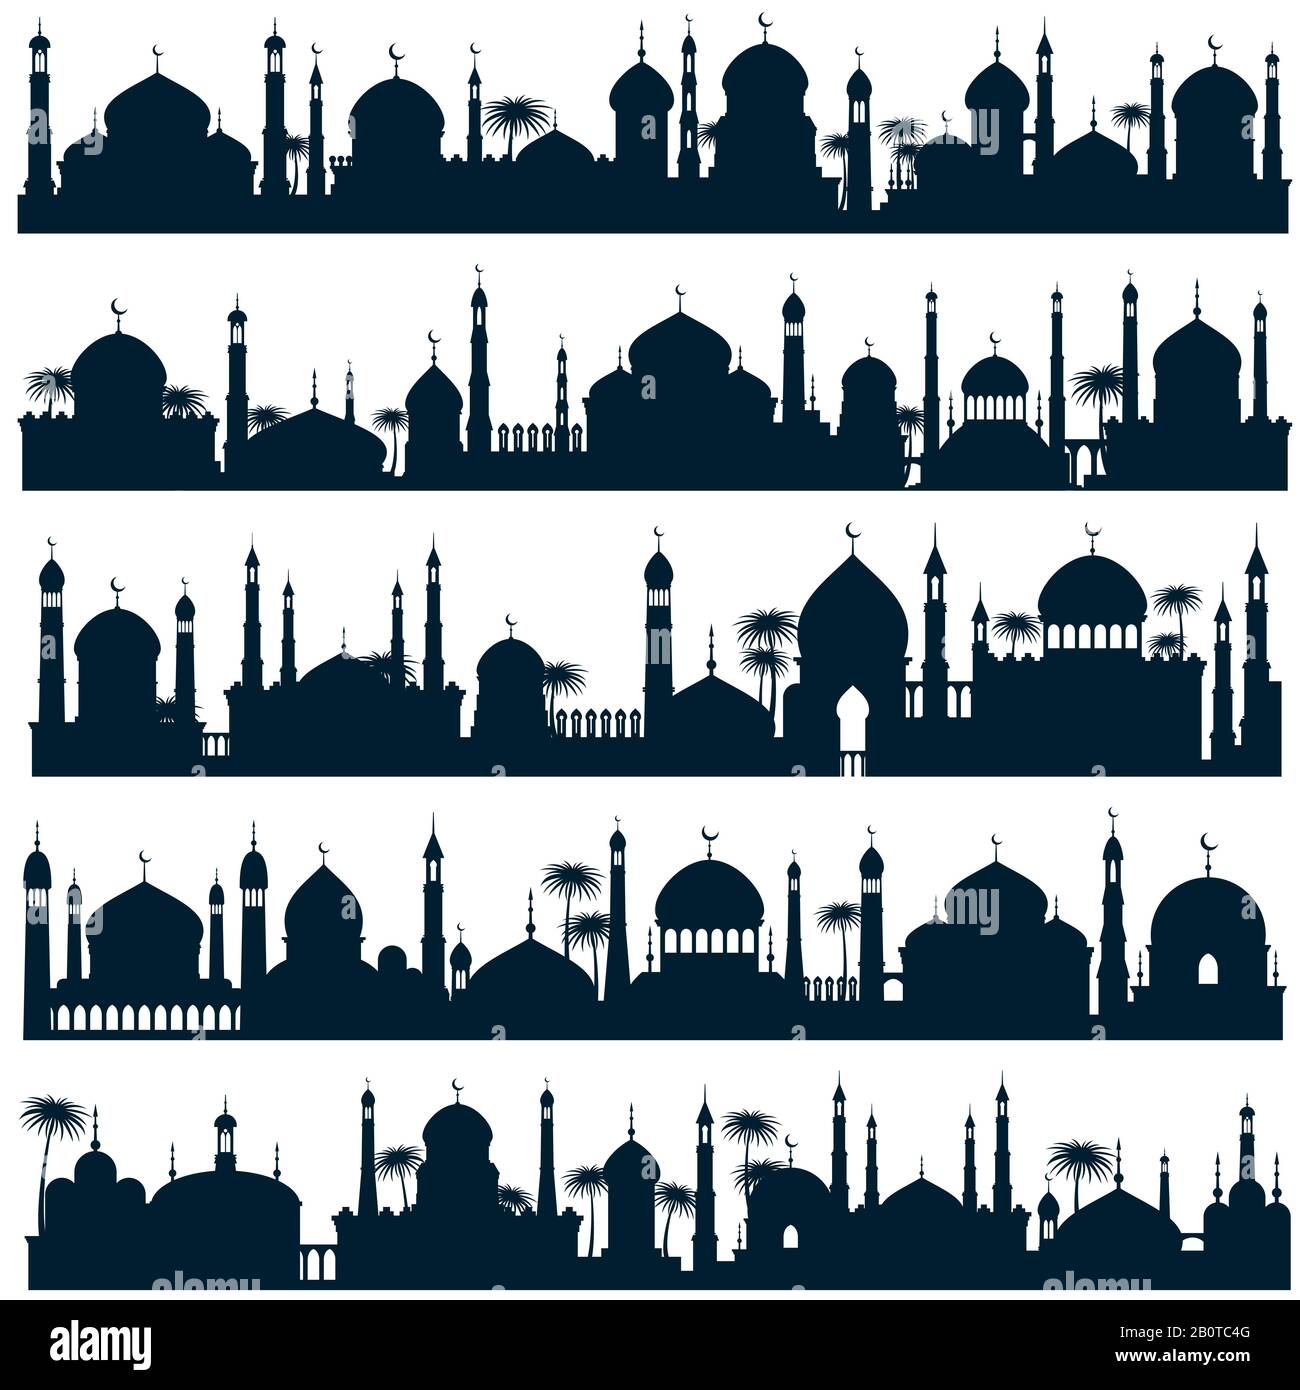 Islamic city skylines with mosque and minaret vector silhouettes arabic architecture. Black silhouette mosque and landmark, illustration of muslim panorama building silhouette city Stock Vector